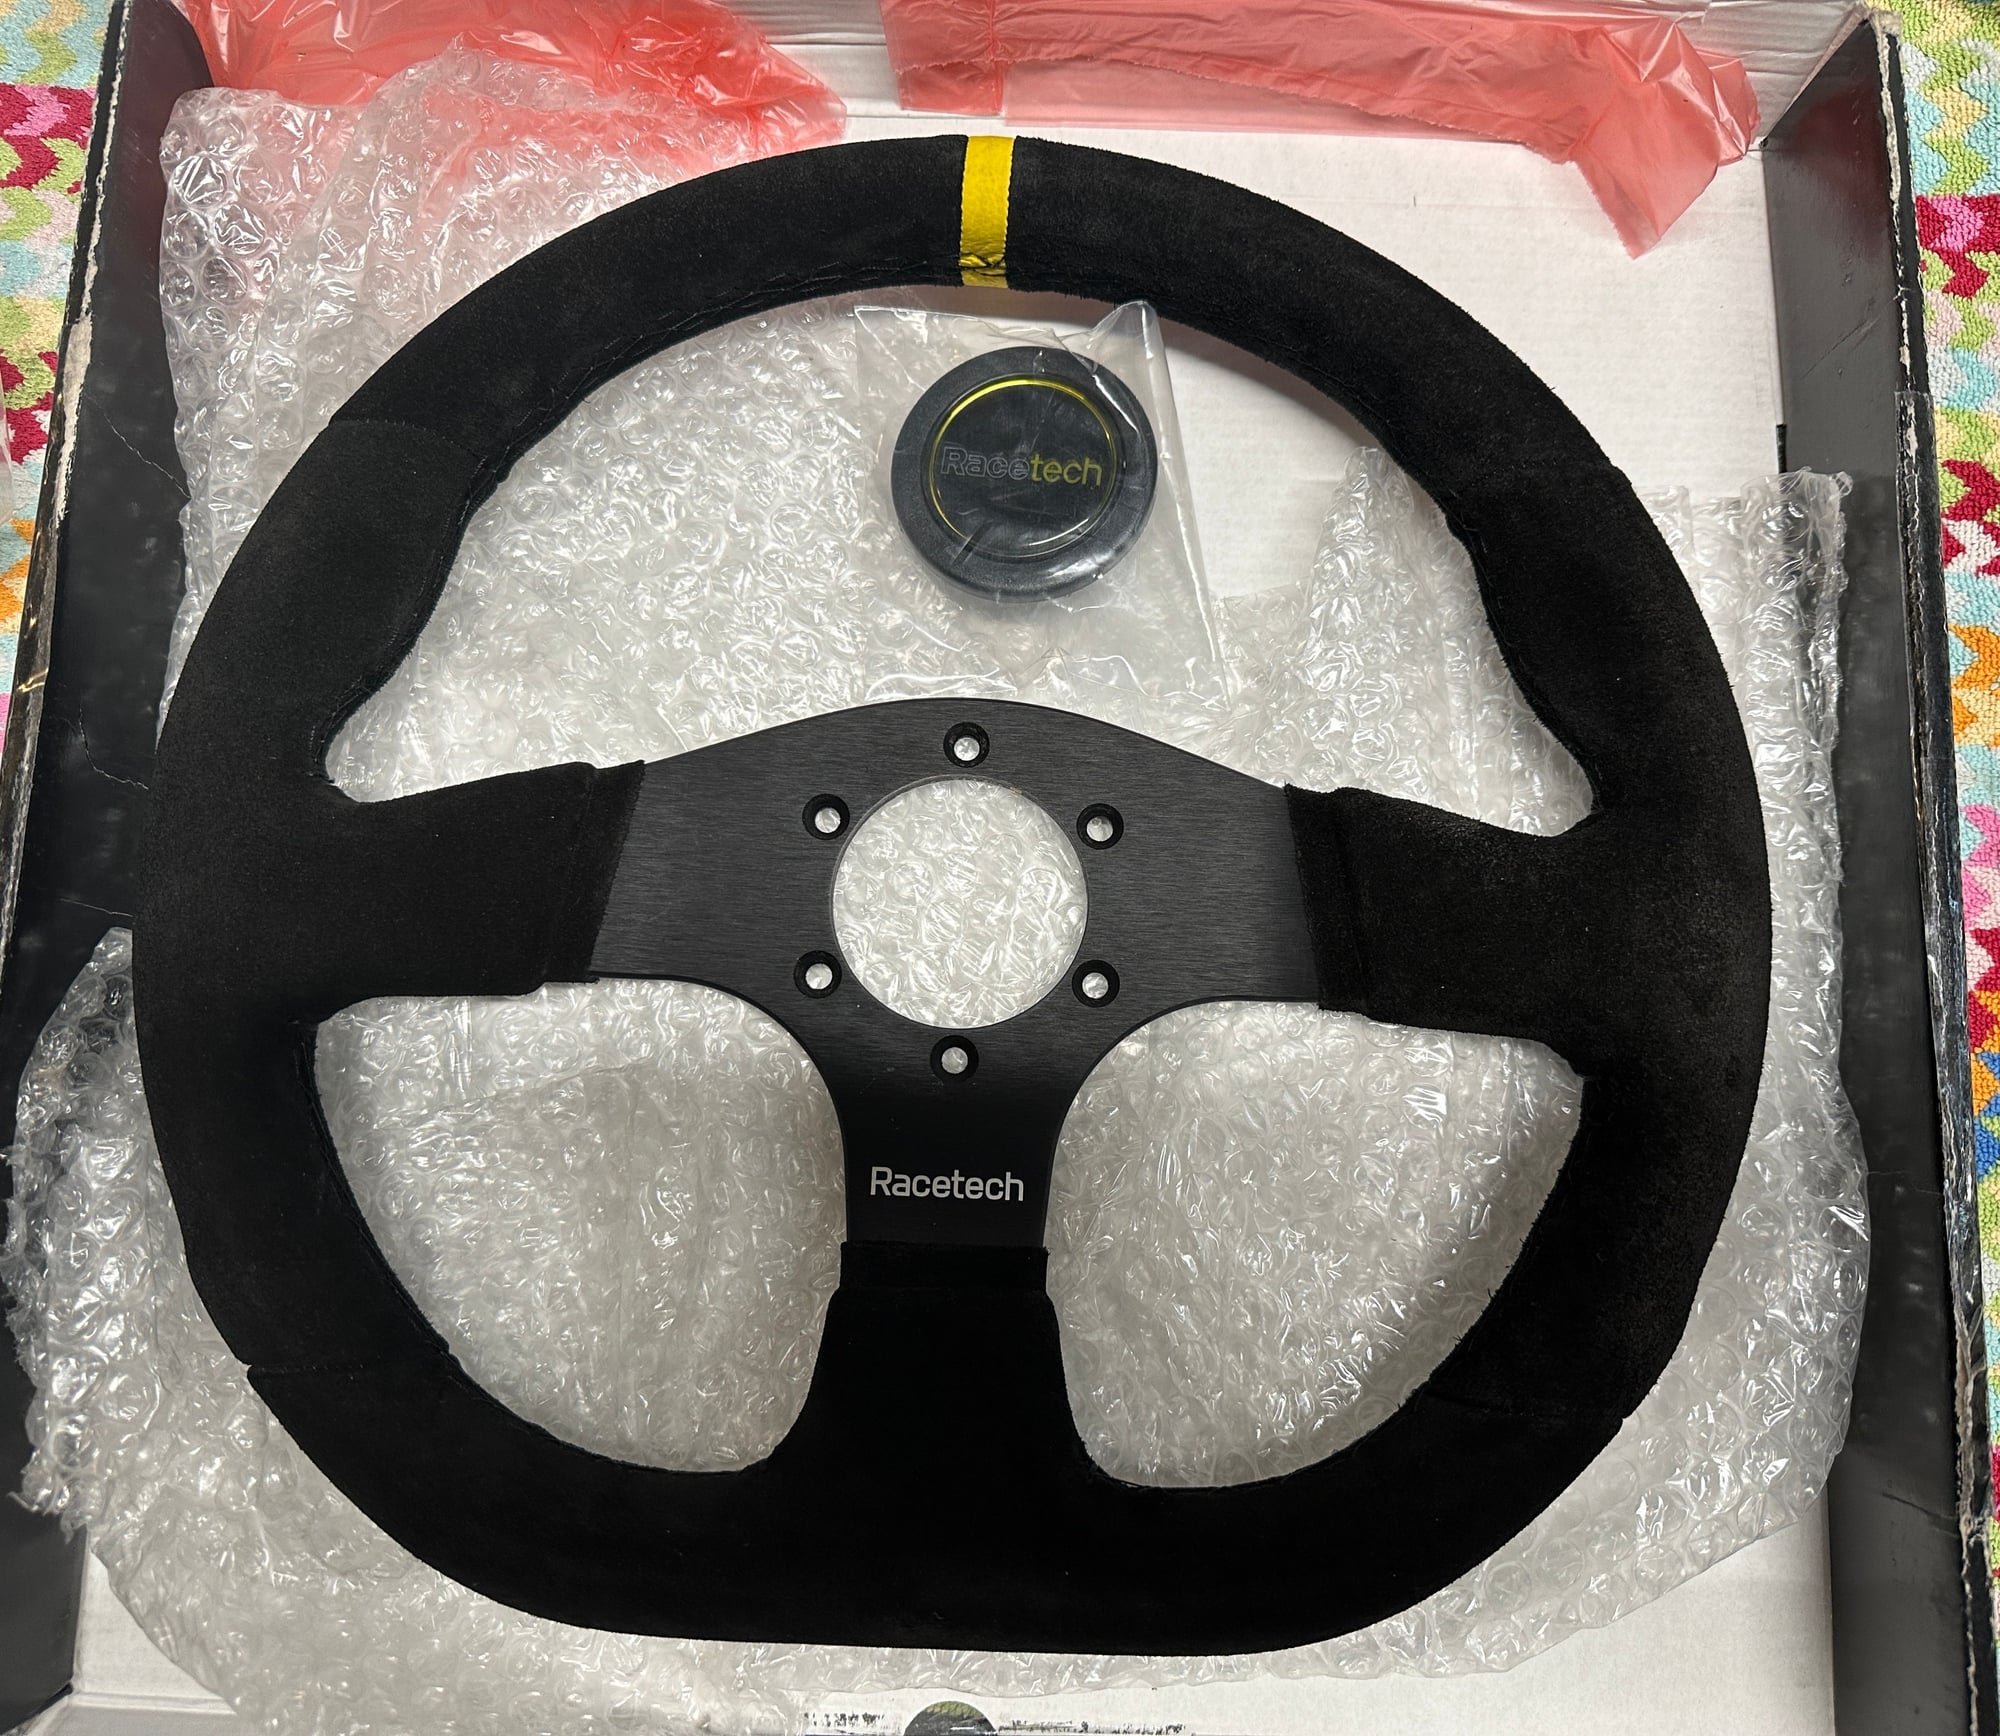 Steering/Suspension - FS: Racetech Flat Suede Steering Wheel - 330mm - Flat Bottom - New In Box - New - All Years  All Models - Fort Collins, CO 80525, United States